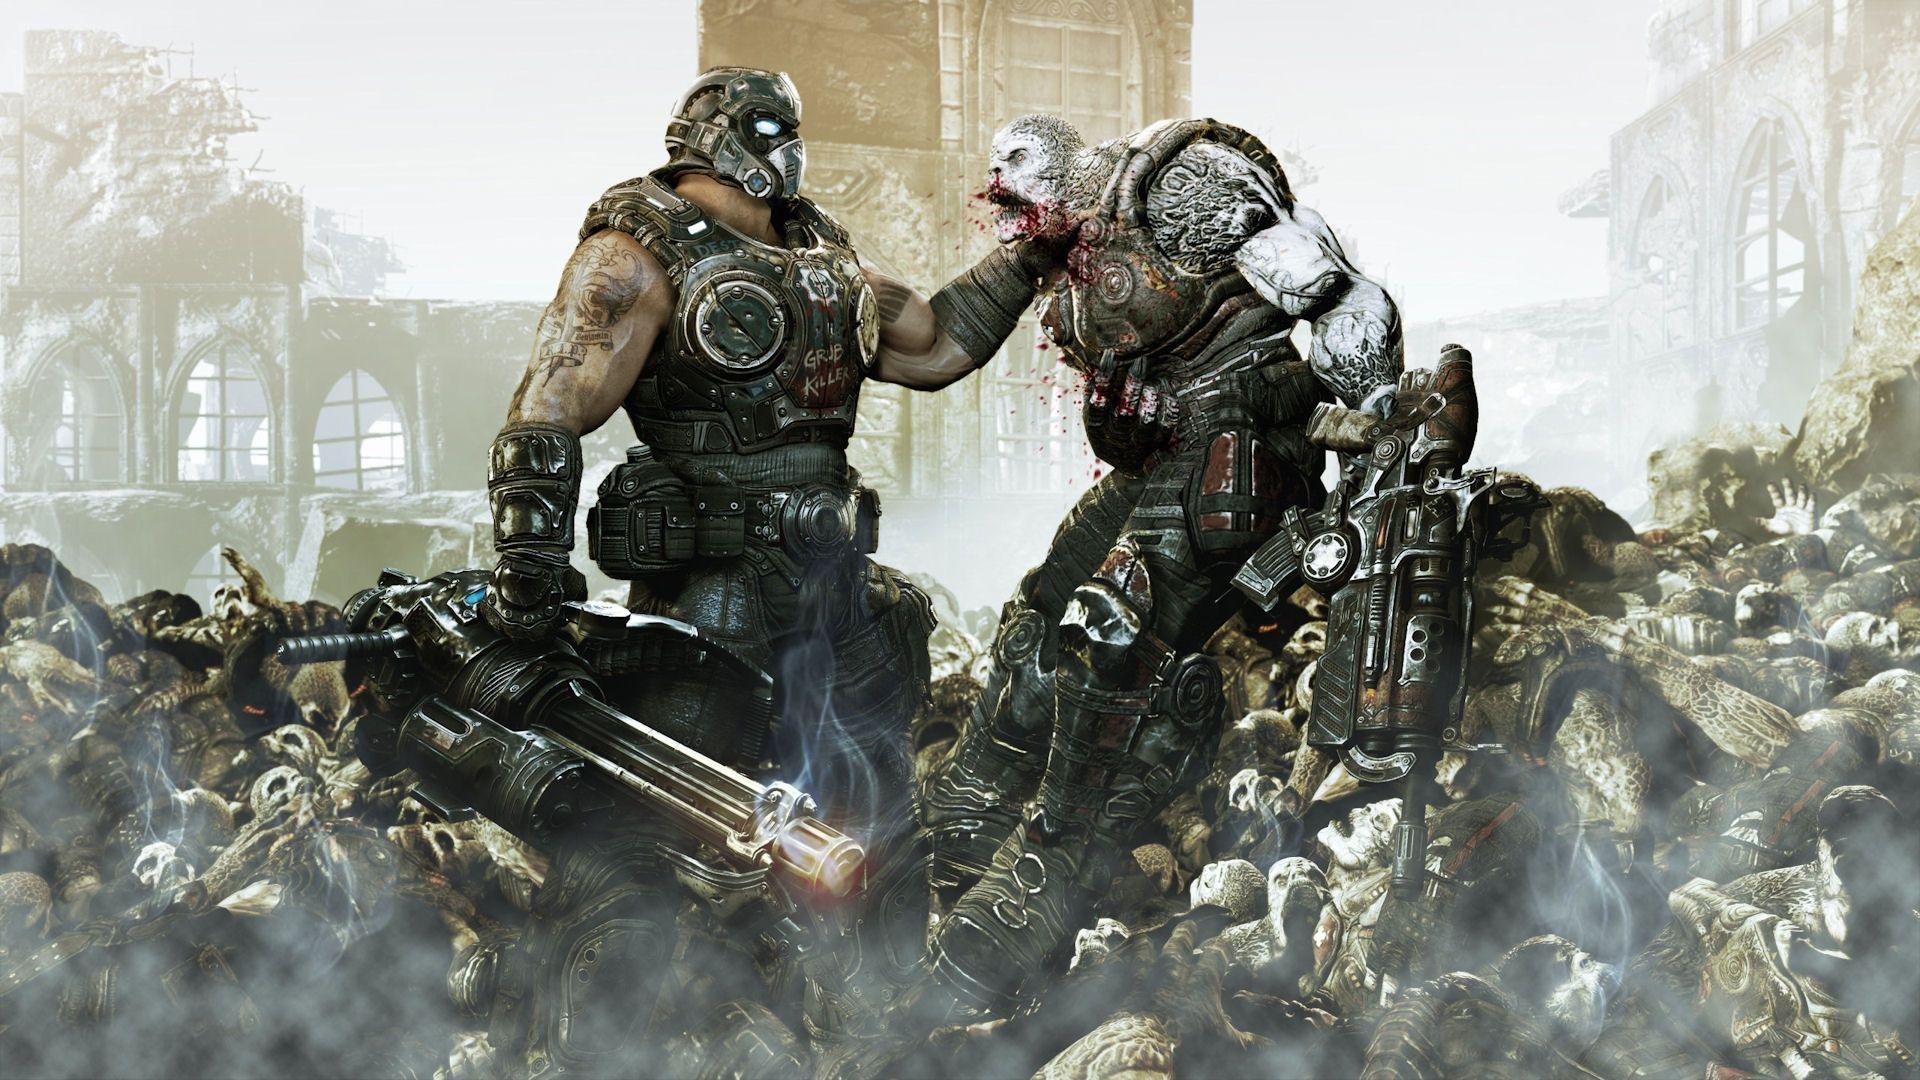 Gears Of War 3 Full HD Wallpaper and Background Imagex1080